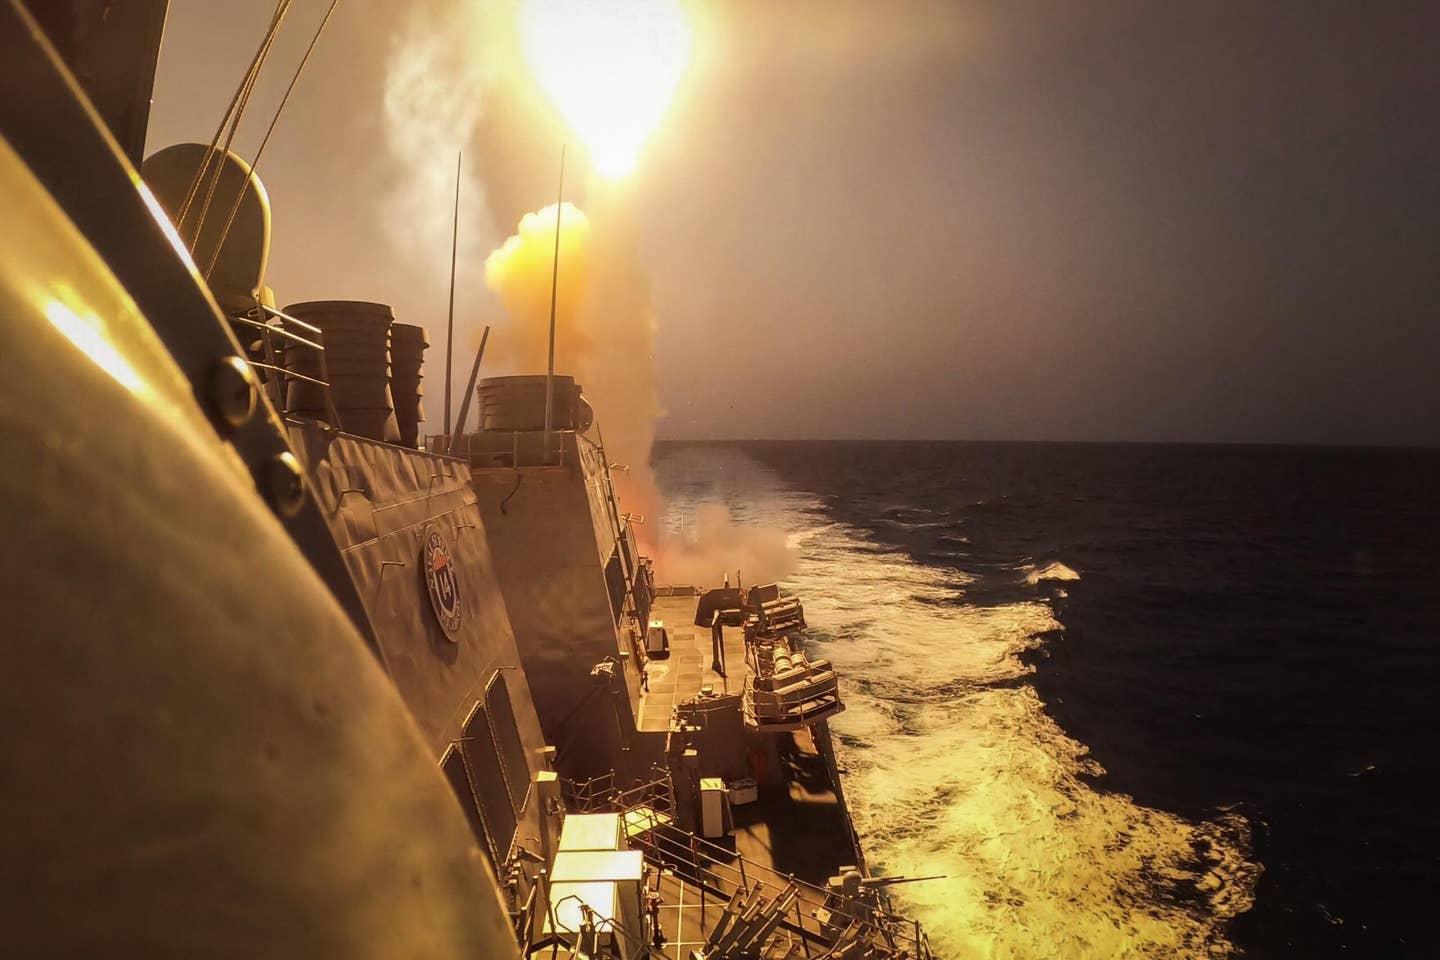 The <em>Arleigh Burke</em> class destroyer USS Carney fires a surface-to-air missile during at a Houthi missile or drone while sailing in the Red Sea on October 19, 2023. <em>USN</em>